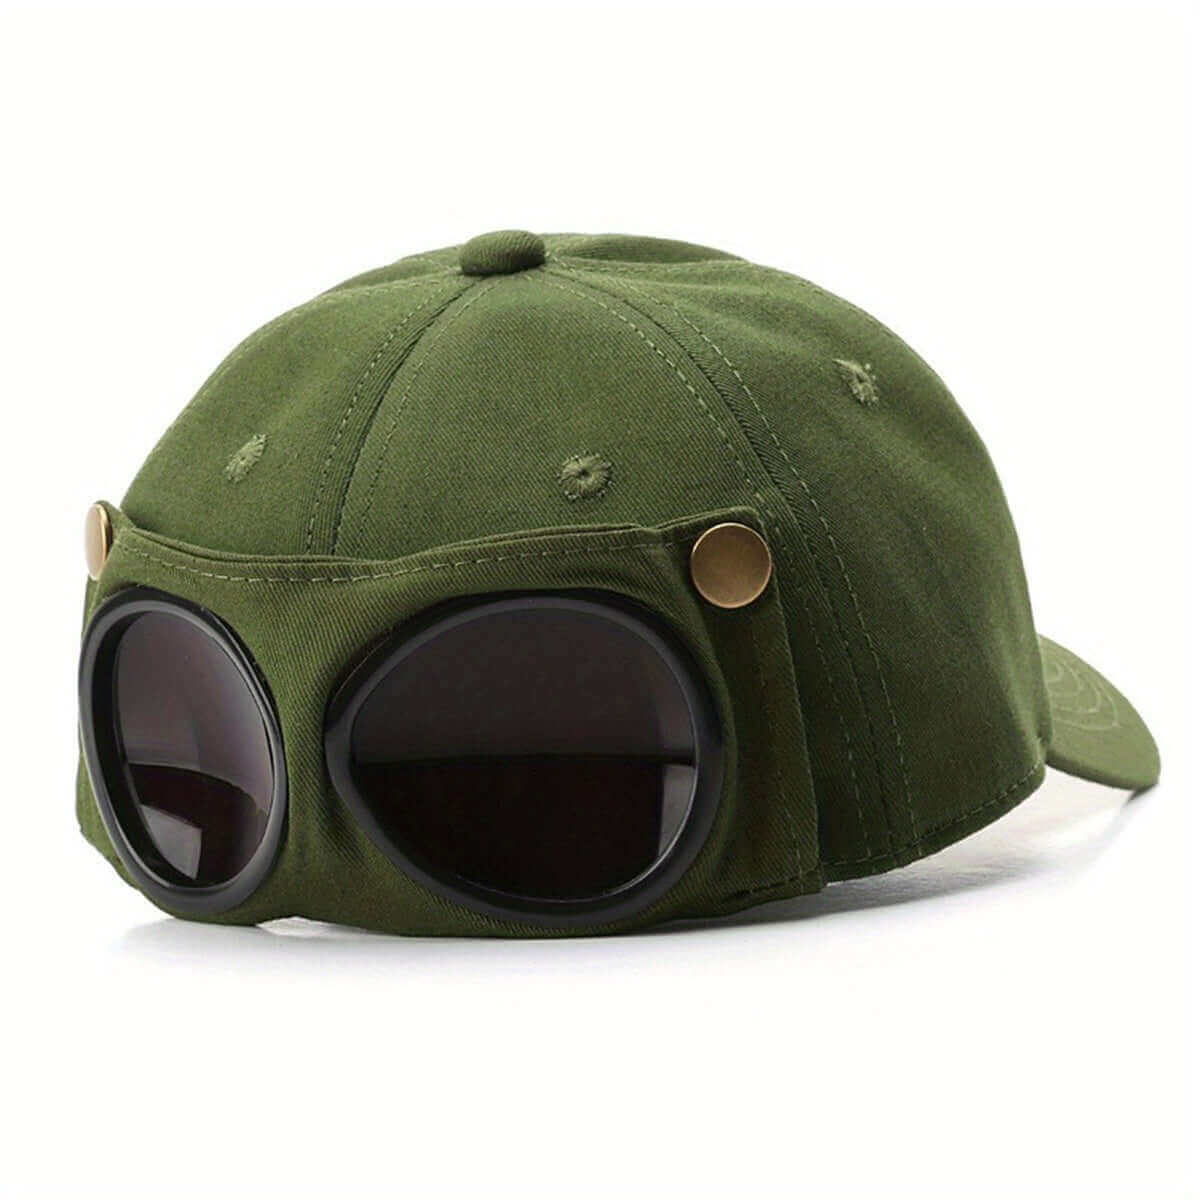 RaveFather Aviator Cap - Perfect for Festivals